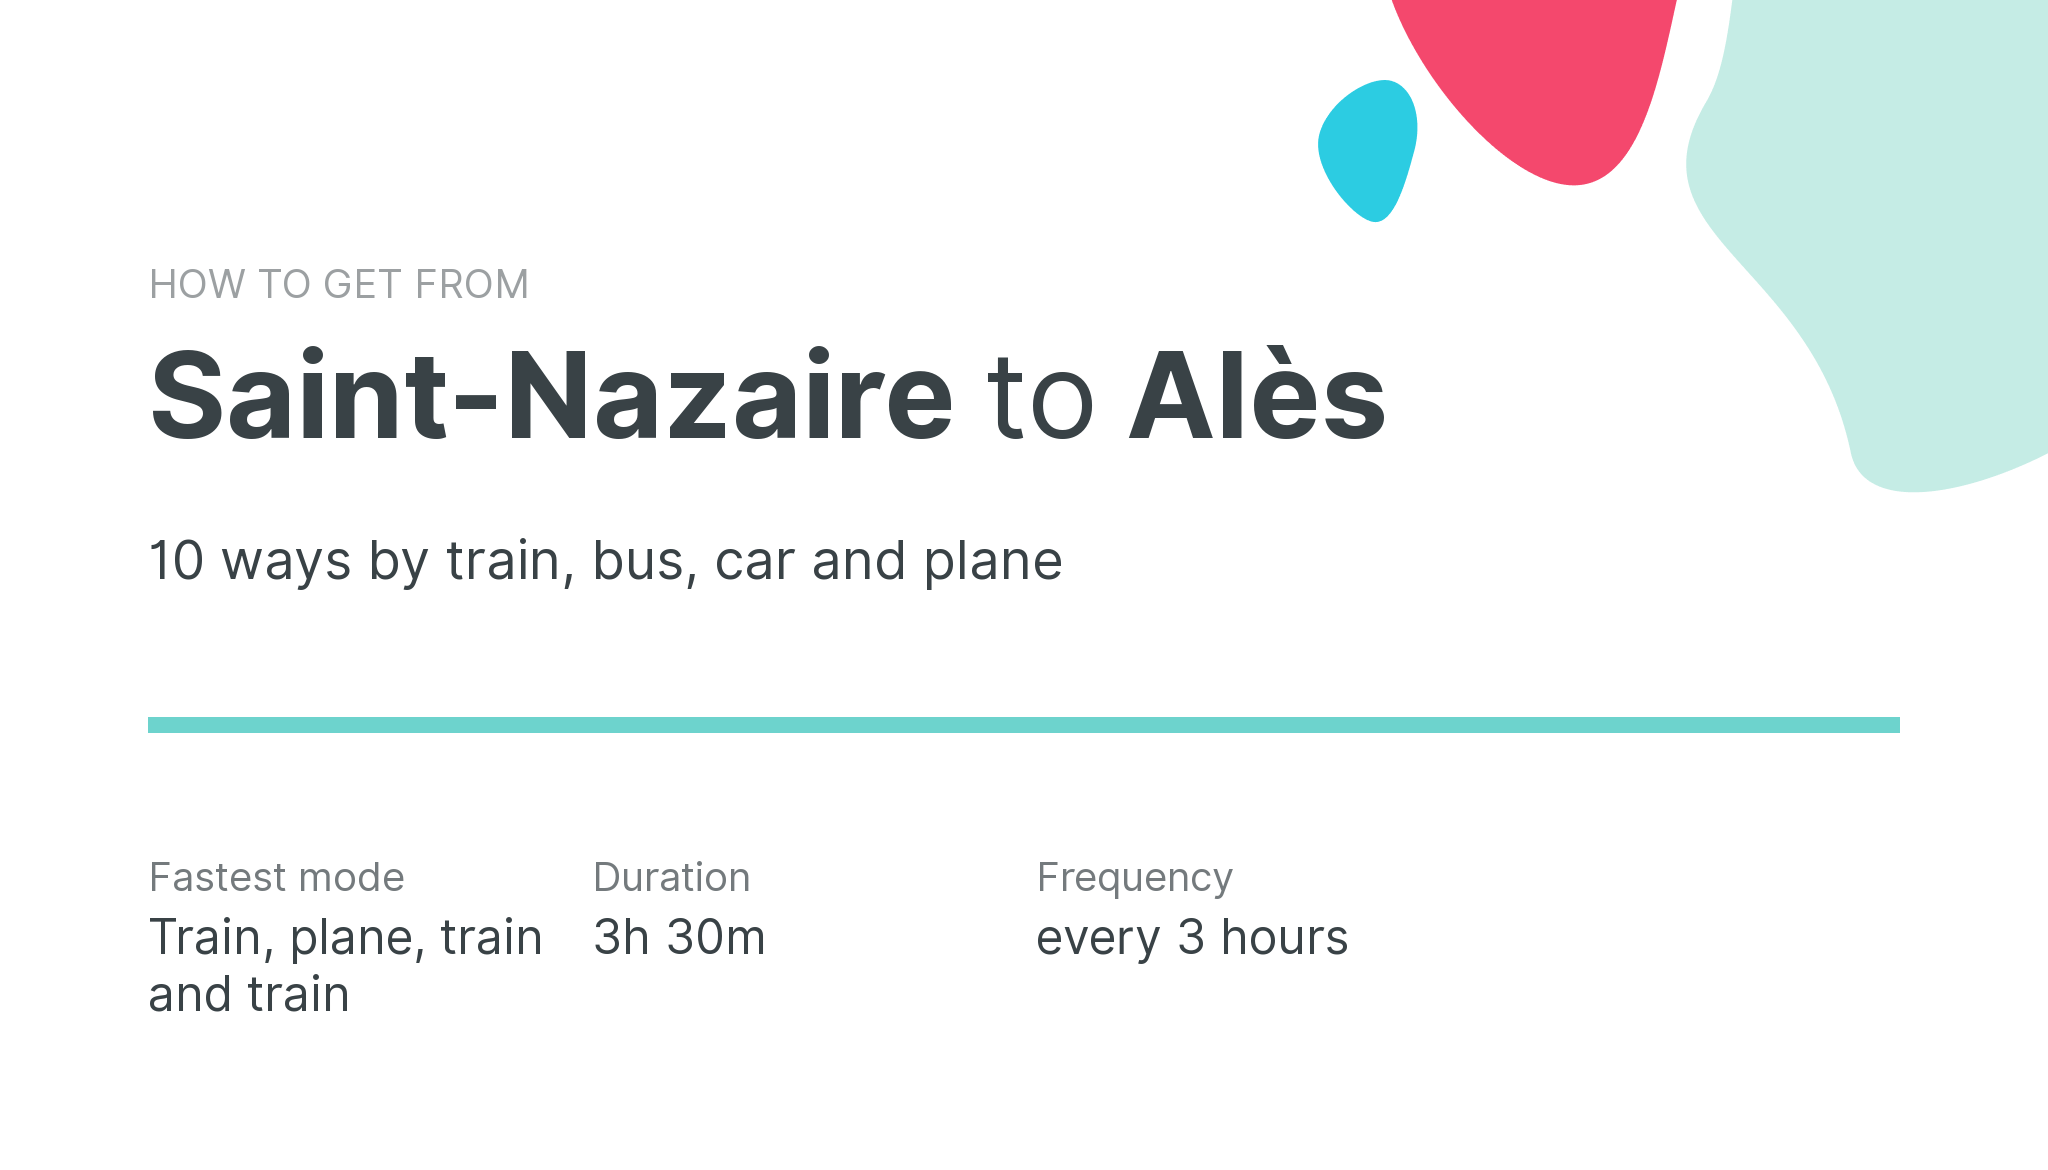 How do I get from Saint-Nazaire to Alès